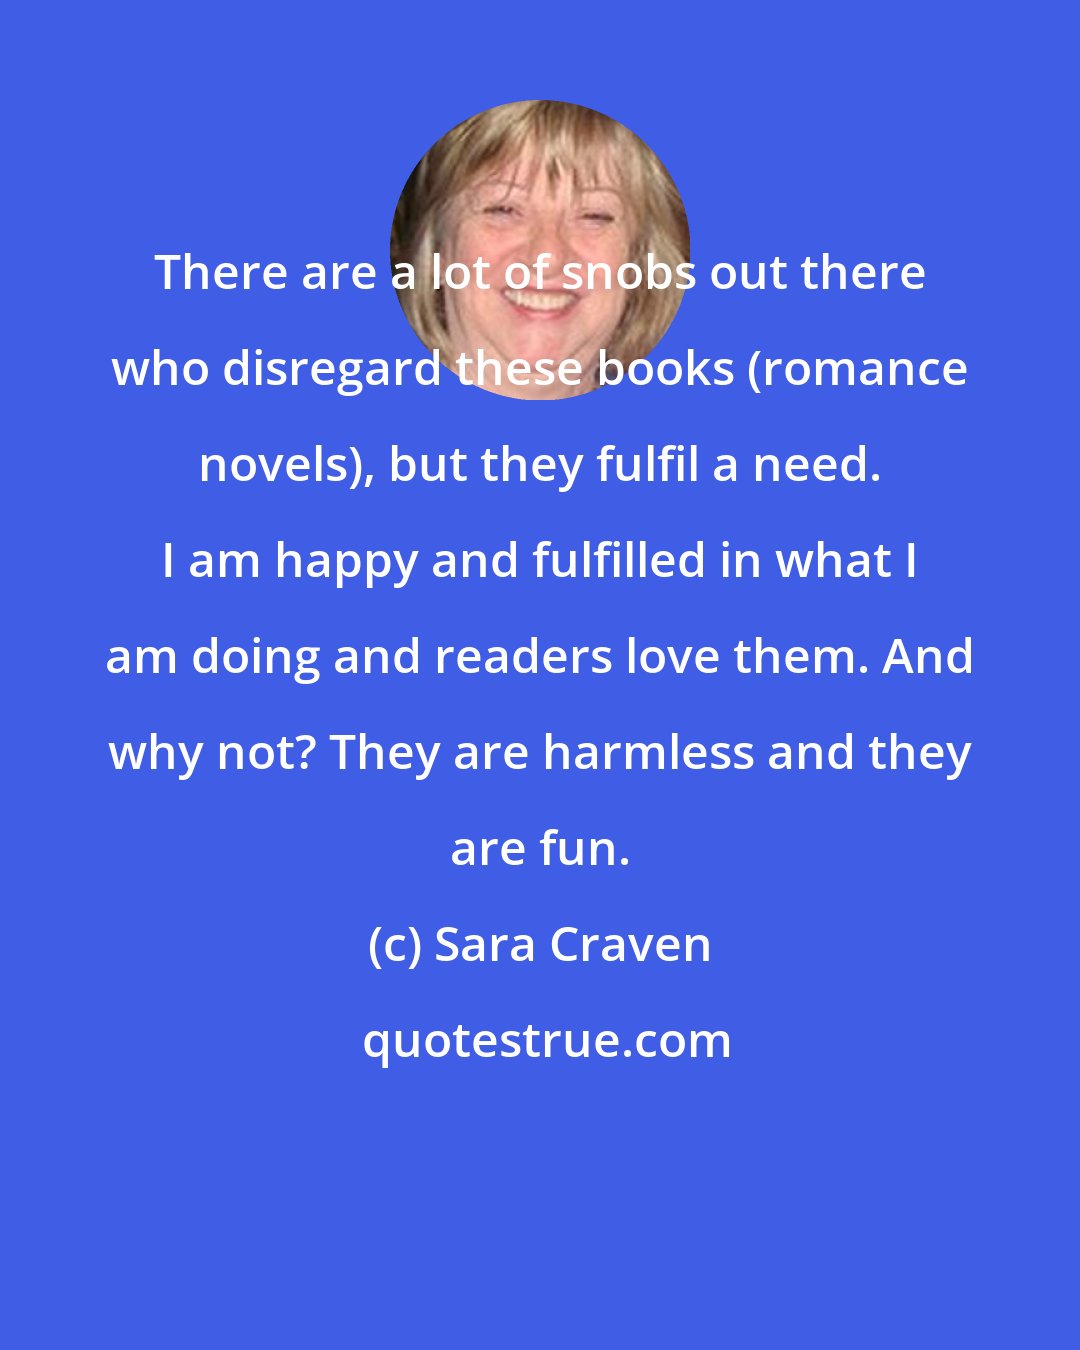 Sara Craven: There are a lot of snobs out there who disregard these books (romance novels), but they fulfil a need. I am happy and fulfilled in what I am doing and readers love them. And why not? They are harmless and they are fun.